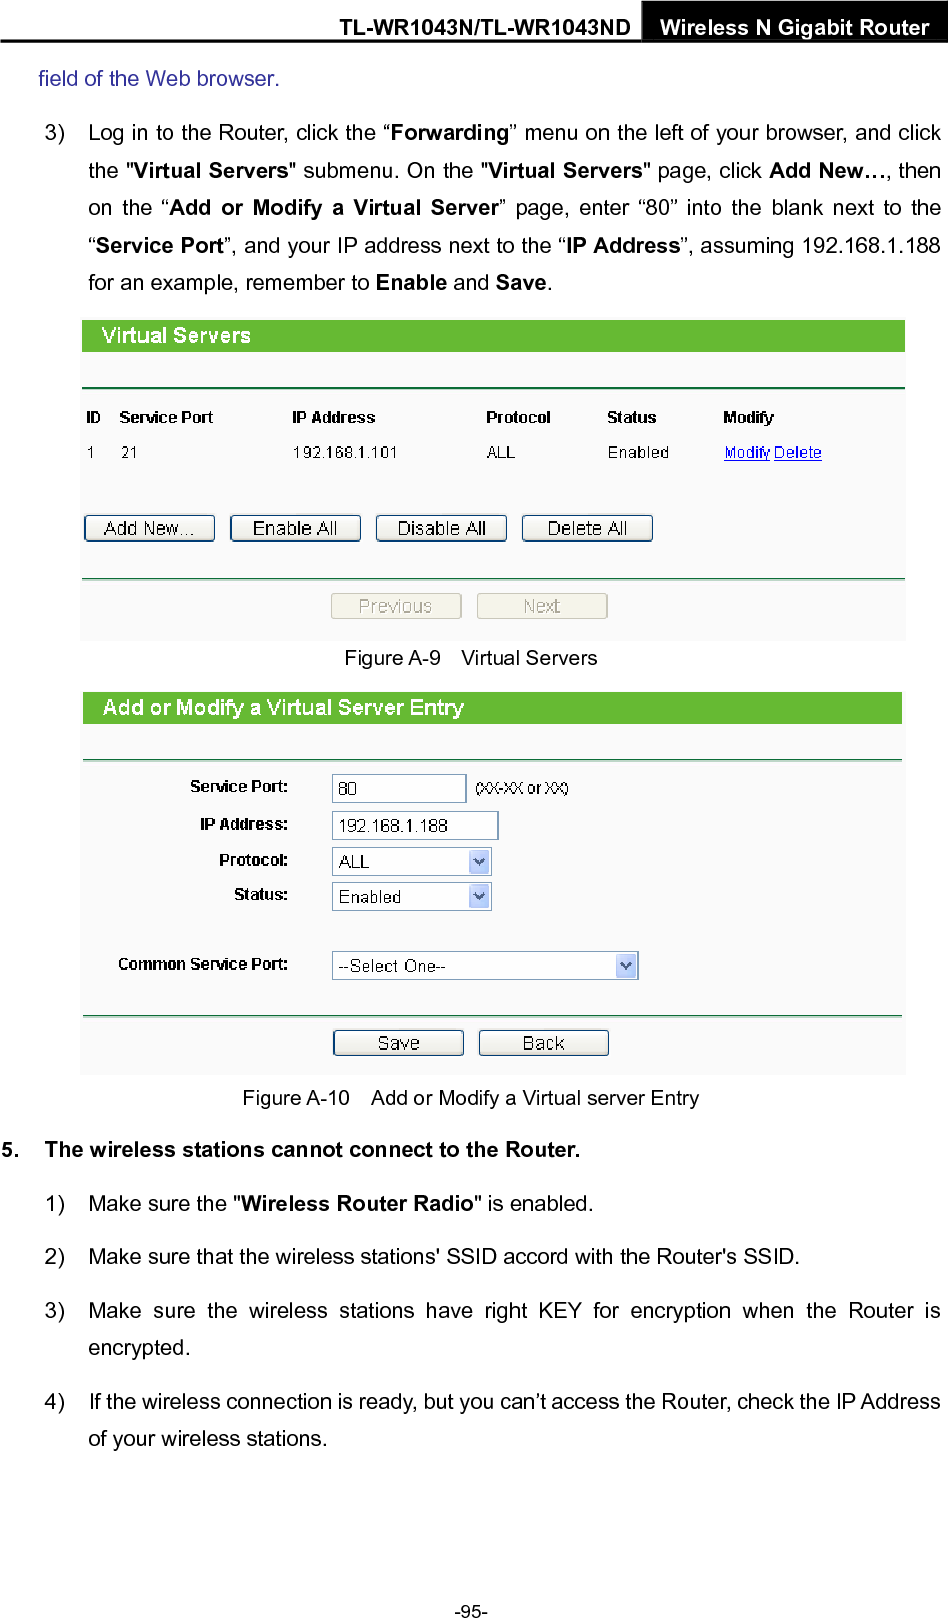 TL-WR1043N/TL-WR1043ND Wireless N Gigabit Router field of the Web browser. 3)  Log in to the Router, click the “Forwarding” menu on the left of your browser, and click the &quot;Virtual Servers&quot; submenu. On the &quot;Virtual Servers&quot; page, click Add New…, then on the “Add or Modify a Virtual Server” page, enter “80” into the blank next to the “Service Port”, and your IP address next to the “IP Address”, assuming 192.168.1.188 for an example, remember to Enable and Save.  Figure A-9  Virtual Servers  Figure A-10    Add or Modify a Virtual server Entry 5.  The wireless stations cannot connect to the Router. 1)  Make sure the &quot;Wireless Router Radio&quot; is enabled. 2)  Make sure that the wireless stations&apos; SSID accord with the Router&apos;s SSID. 3)  Make sure the wireless stations have right KEY for encryption when the Router is encrypted. 4)  If the wireless connection is ready, but you can’t access the Router, check the IP Address of your wireless stations.  -95- 